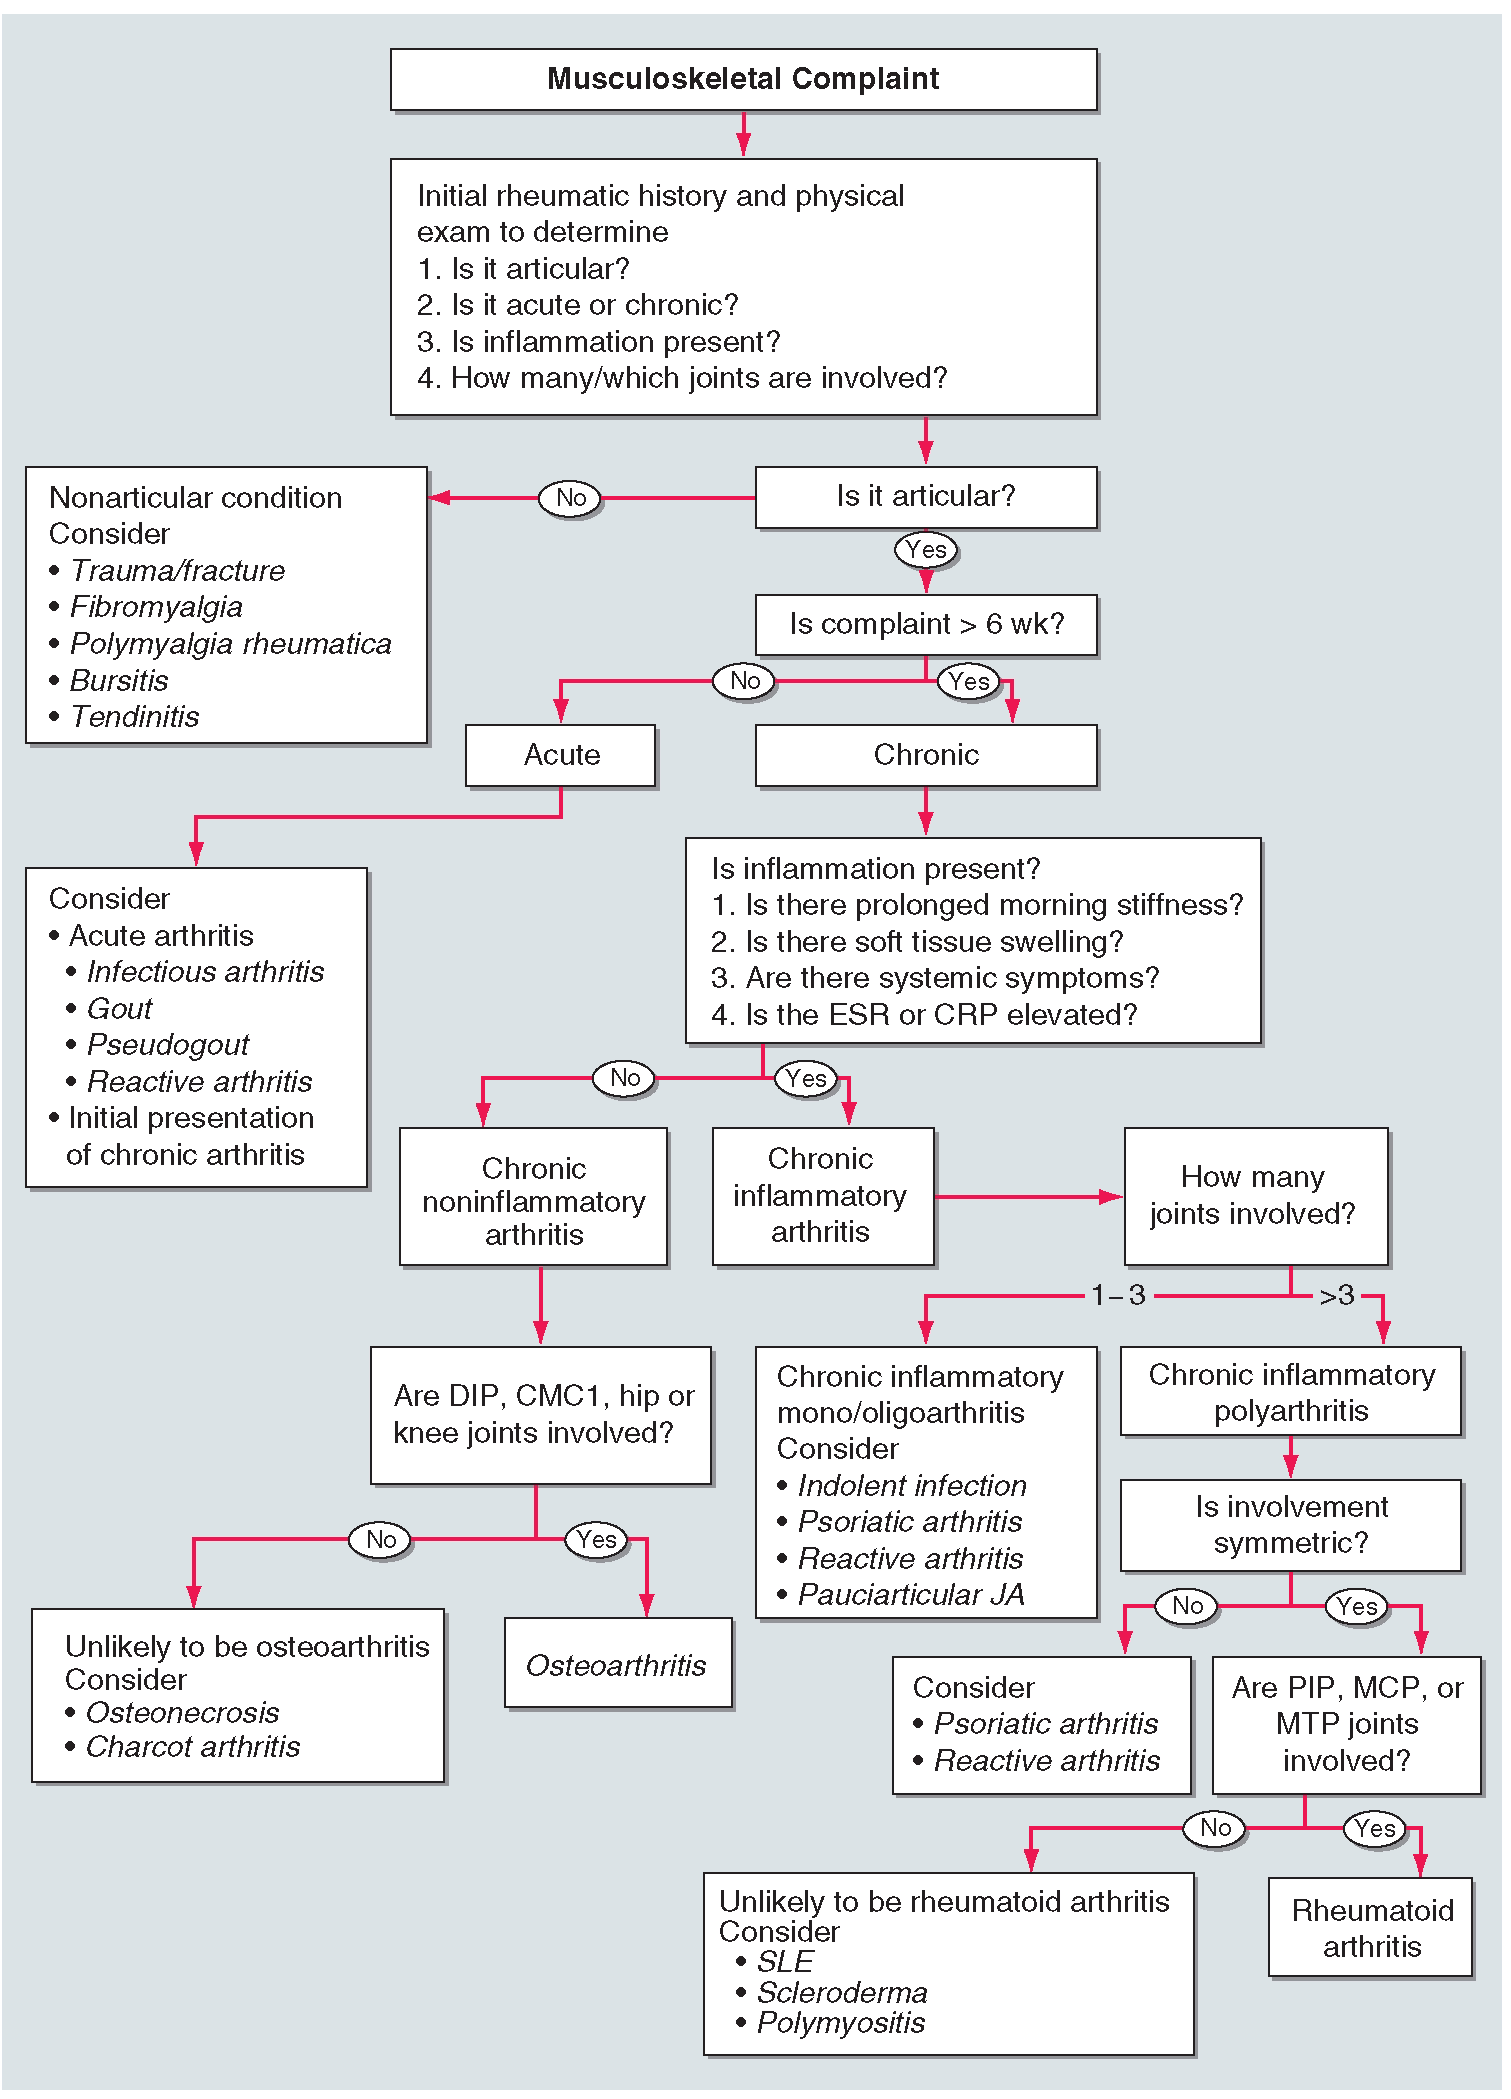 Algorithm for the diagnosis of musculoskeletal complaints. An approach to formulating a differential diagnosis (shown in italics). (ESR, erythrocyte sedimentation rate; CRP C-reactive protein; DIP, distal inter-phalangeal; CMC, carpometacarpal; PIP, proximal interphalangeal; MCP metacarpophalangeal; MTP, metatarsophalangeal; PMR, polymyalgia rheumatica; SLE, systemic lupus erythematosus; JA, juvenile arthritis.) 